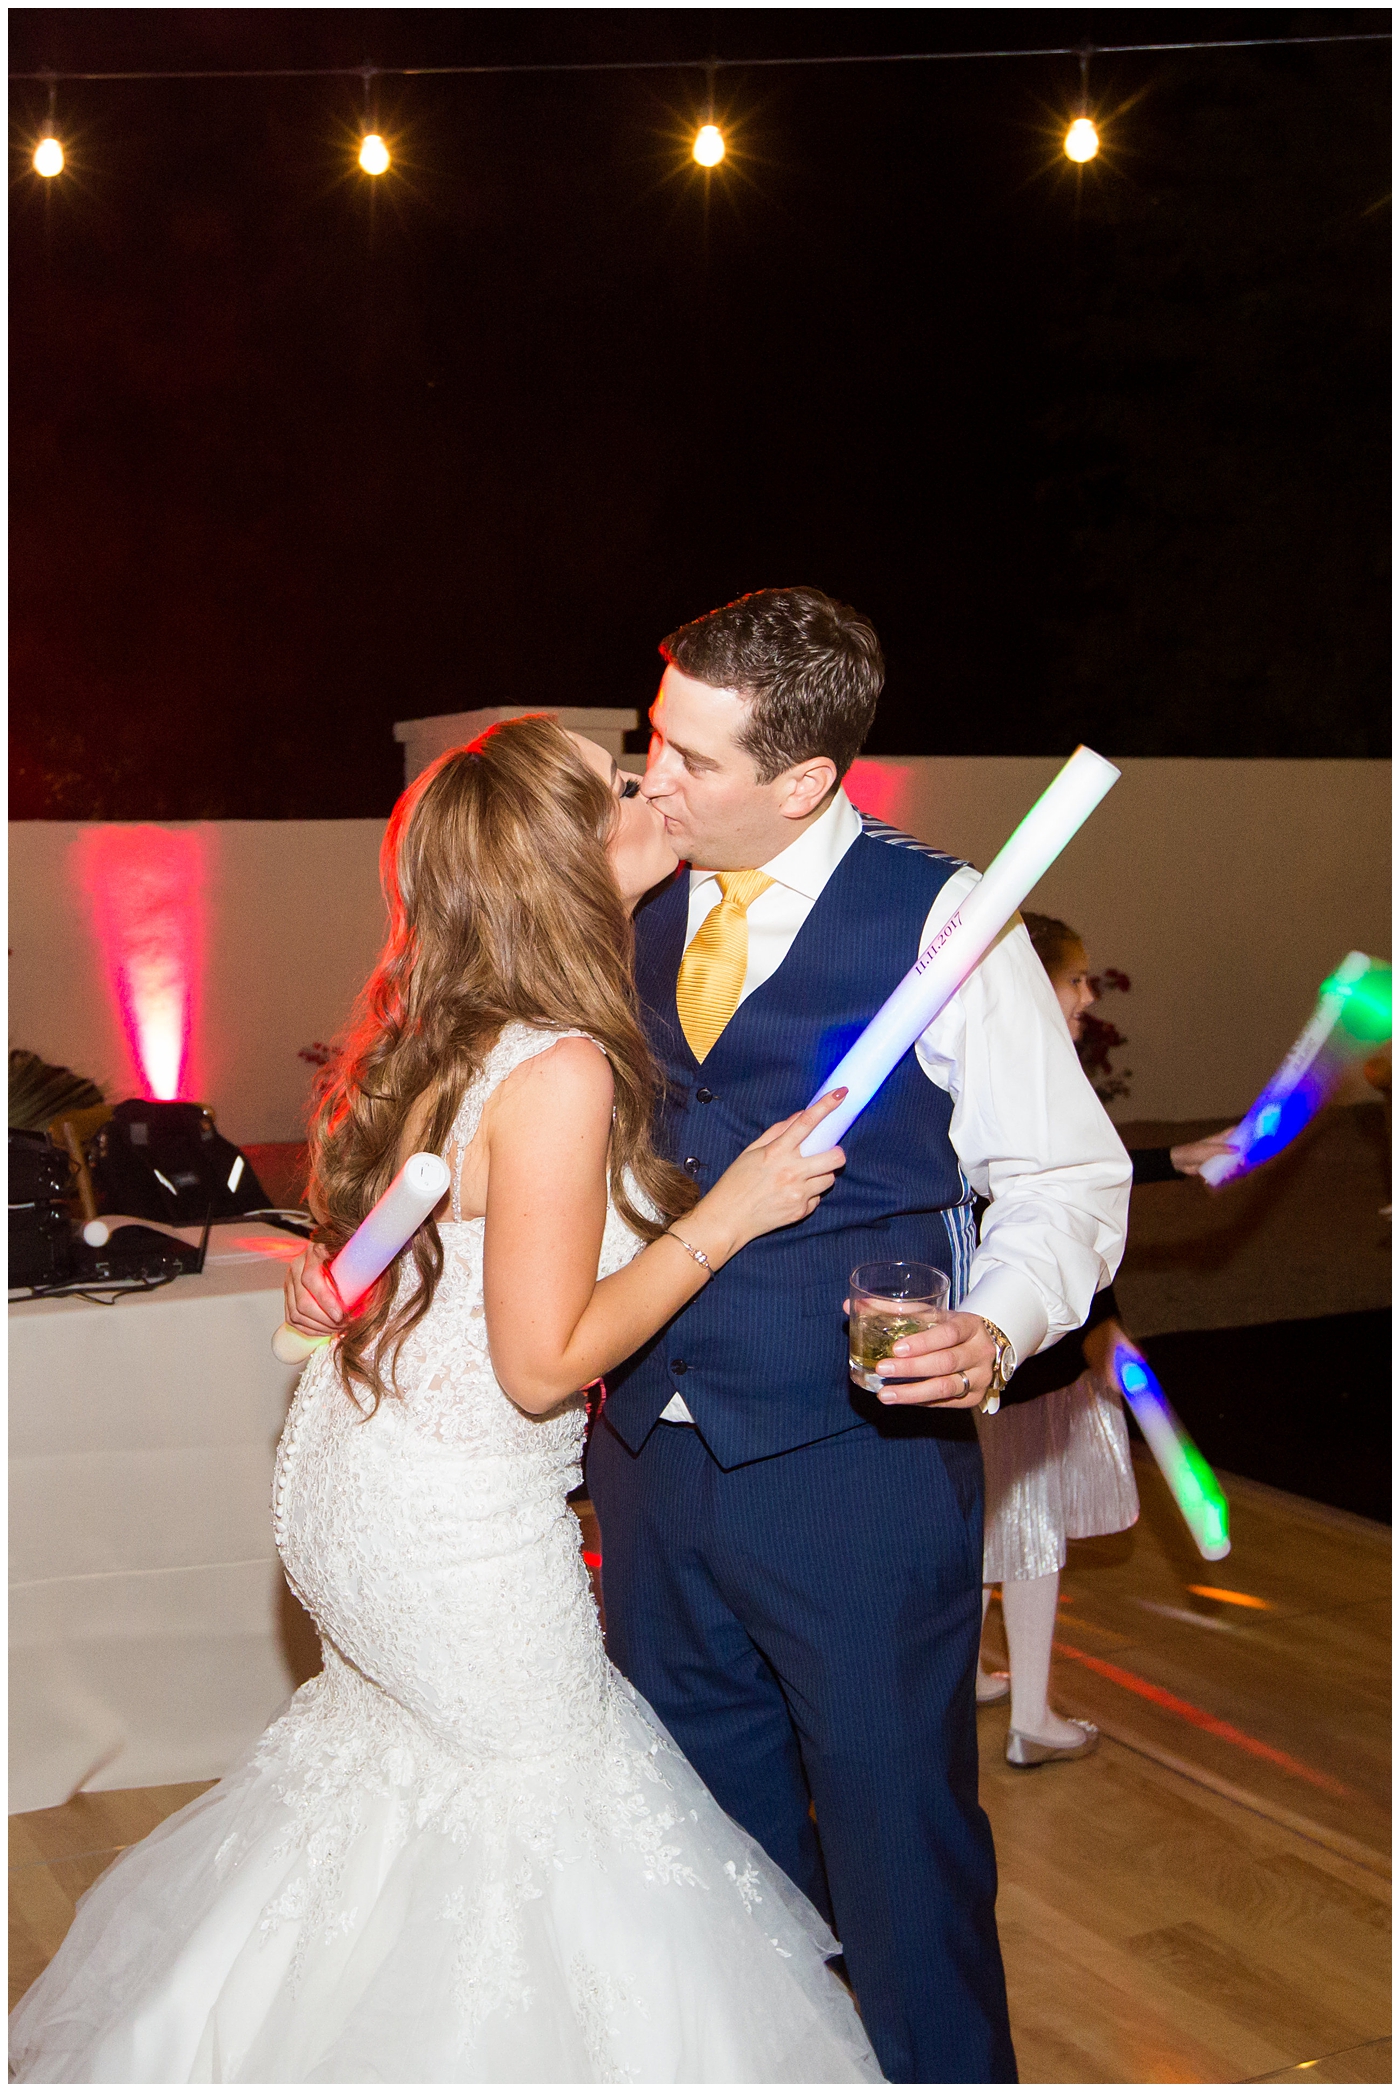 groom in blue suit with yellow tie and red rose boutonniere and bride in morilee wedding dress with red and white rose with light up rave sticks for wedding reception guests dancing at outdoor wedding reception with twinkle lights strung above